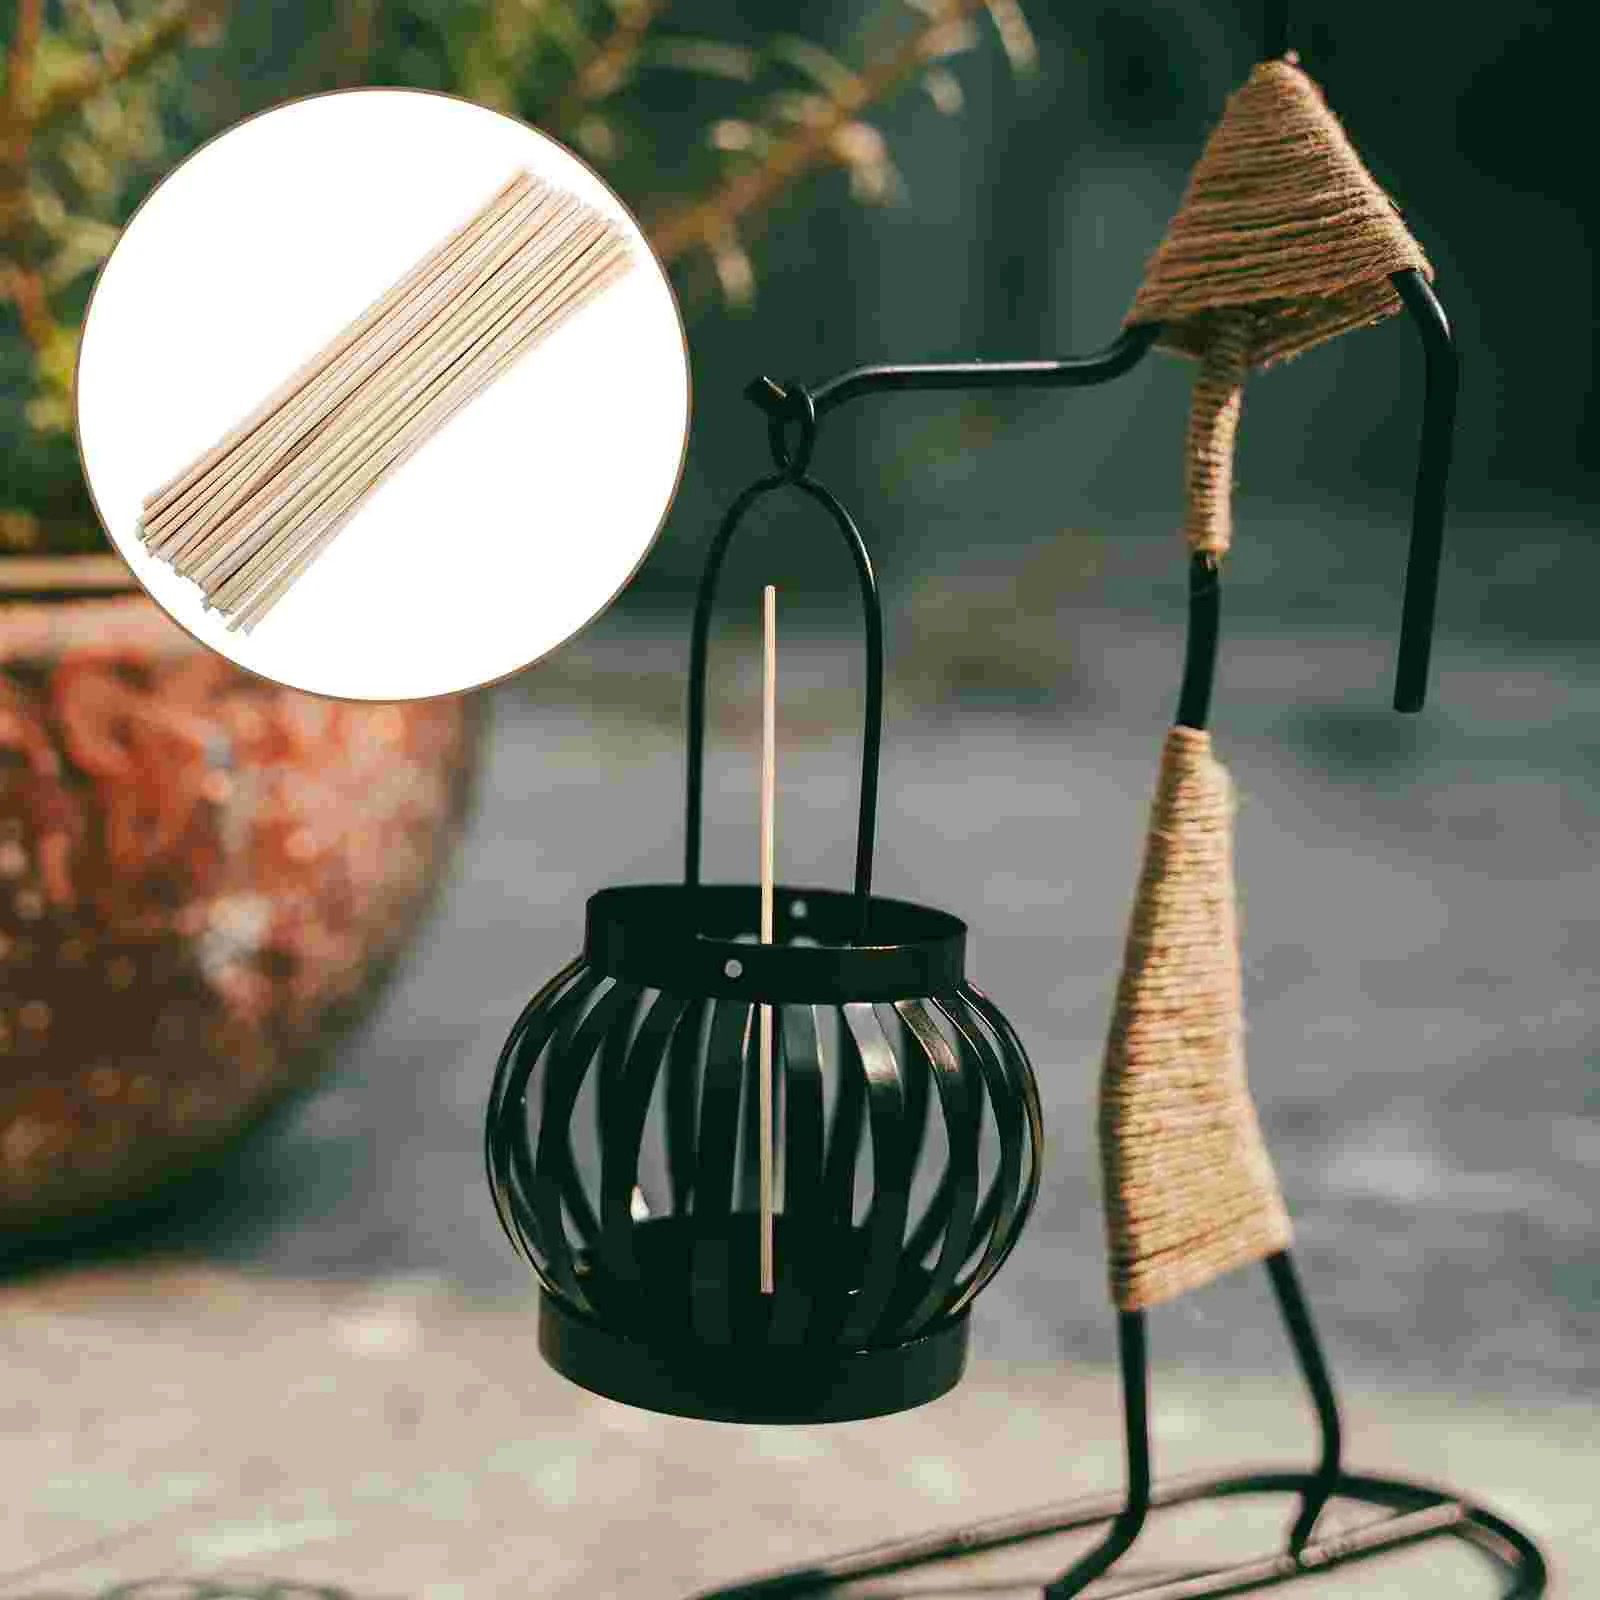 

100 Pcs Aroma Sticks Lavender Perfume Diffuser Natural Reed Essential Oil Diffusers Wands Rattan Refill